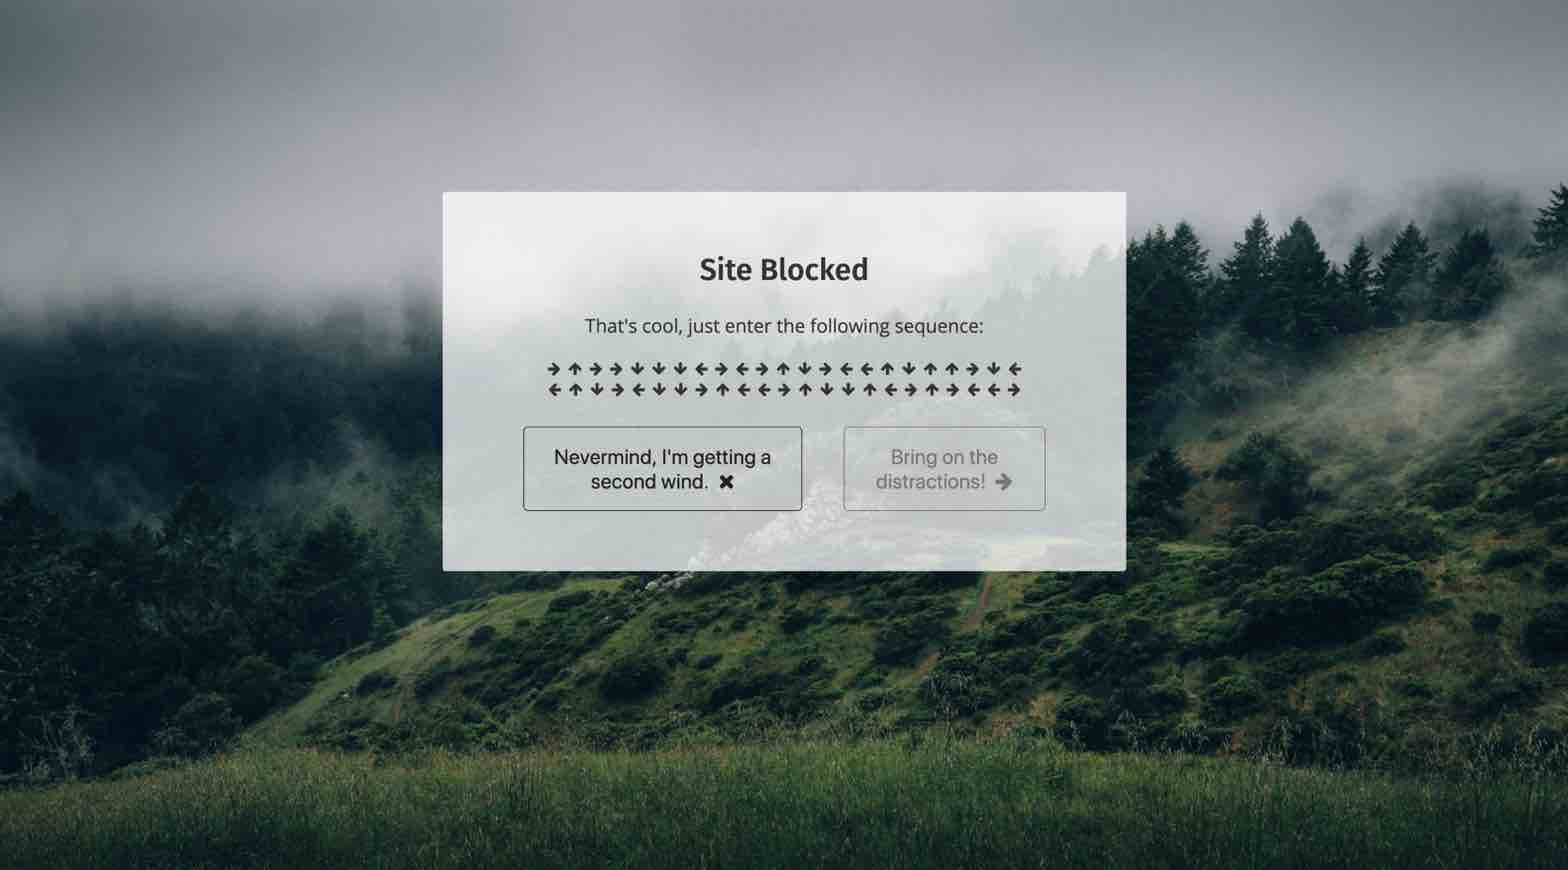 [Focusly](https://chrome.google.com/webstore/detail/focusly/jlihnplddpebplnfafhdanaiapbeikbk?hl=gb) blocks access to websites on a blacklist, then helps people stick with their intention by requiring them to type in a series of 46 arrow keys in a specific order, before they can stop a blocking session.